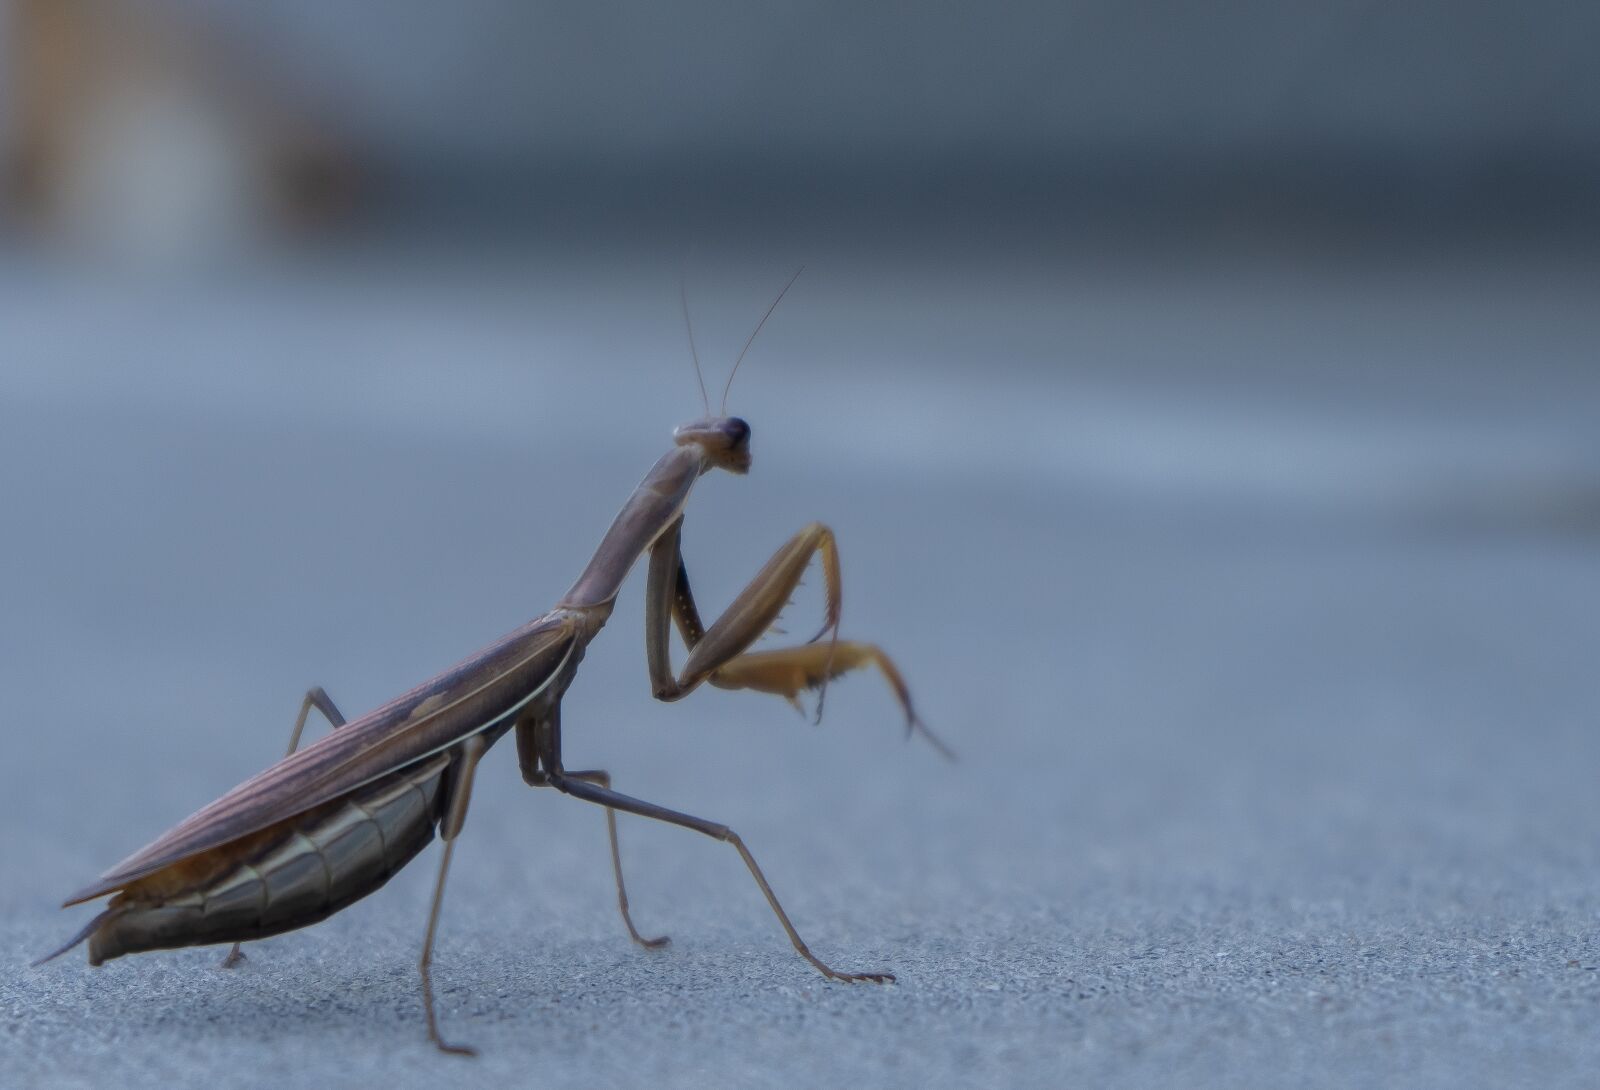 Sony a7 II sample photo. Praying mantis, bugs, insect photography